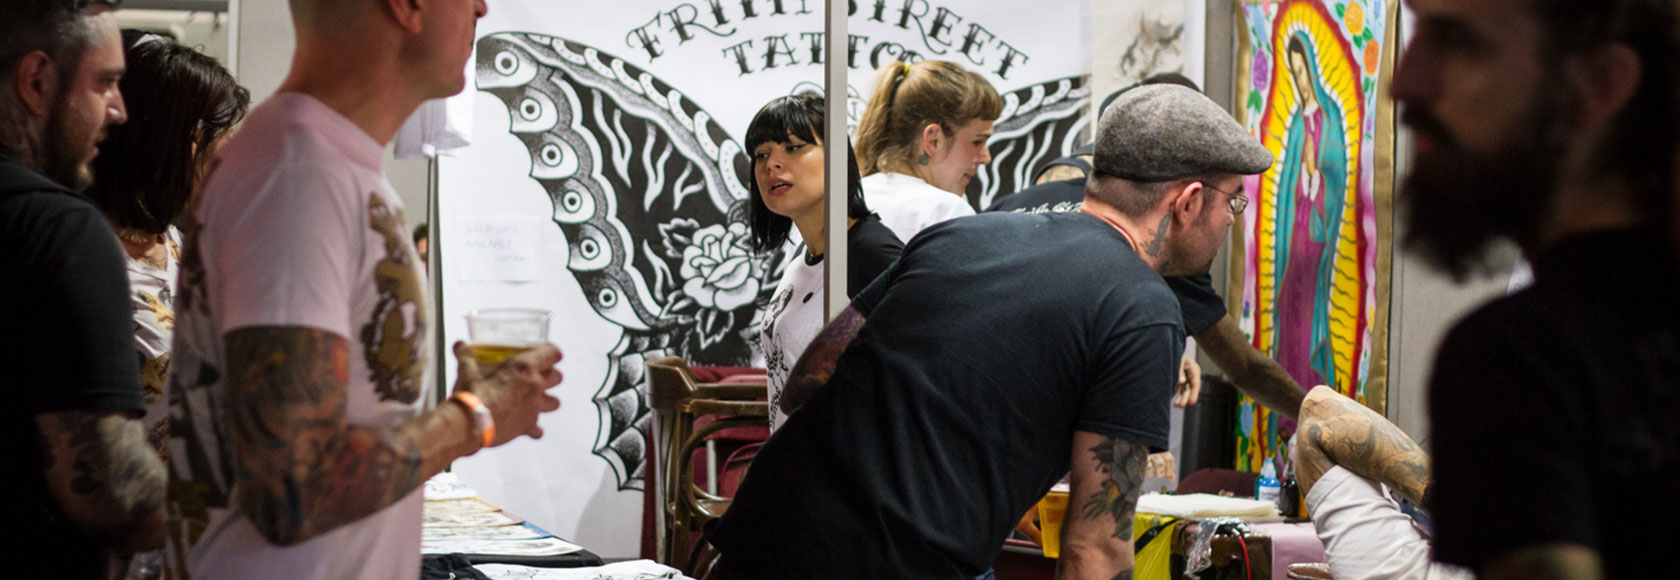 The Big London Tattoo Show: What's it like to get your eyeball tattooed? |  Euronews